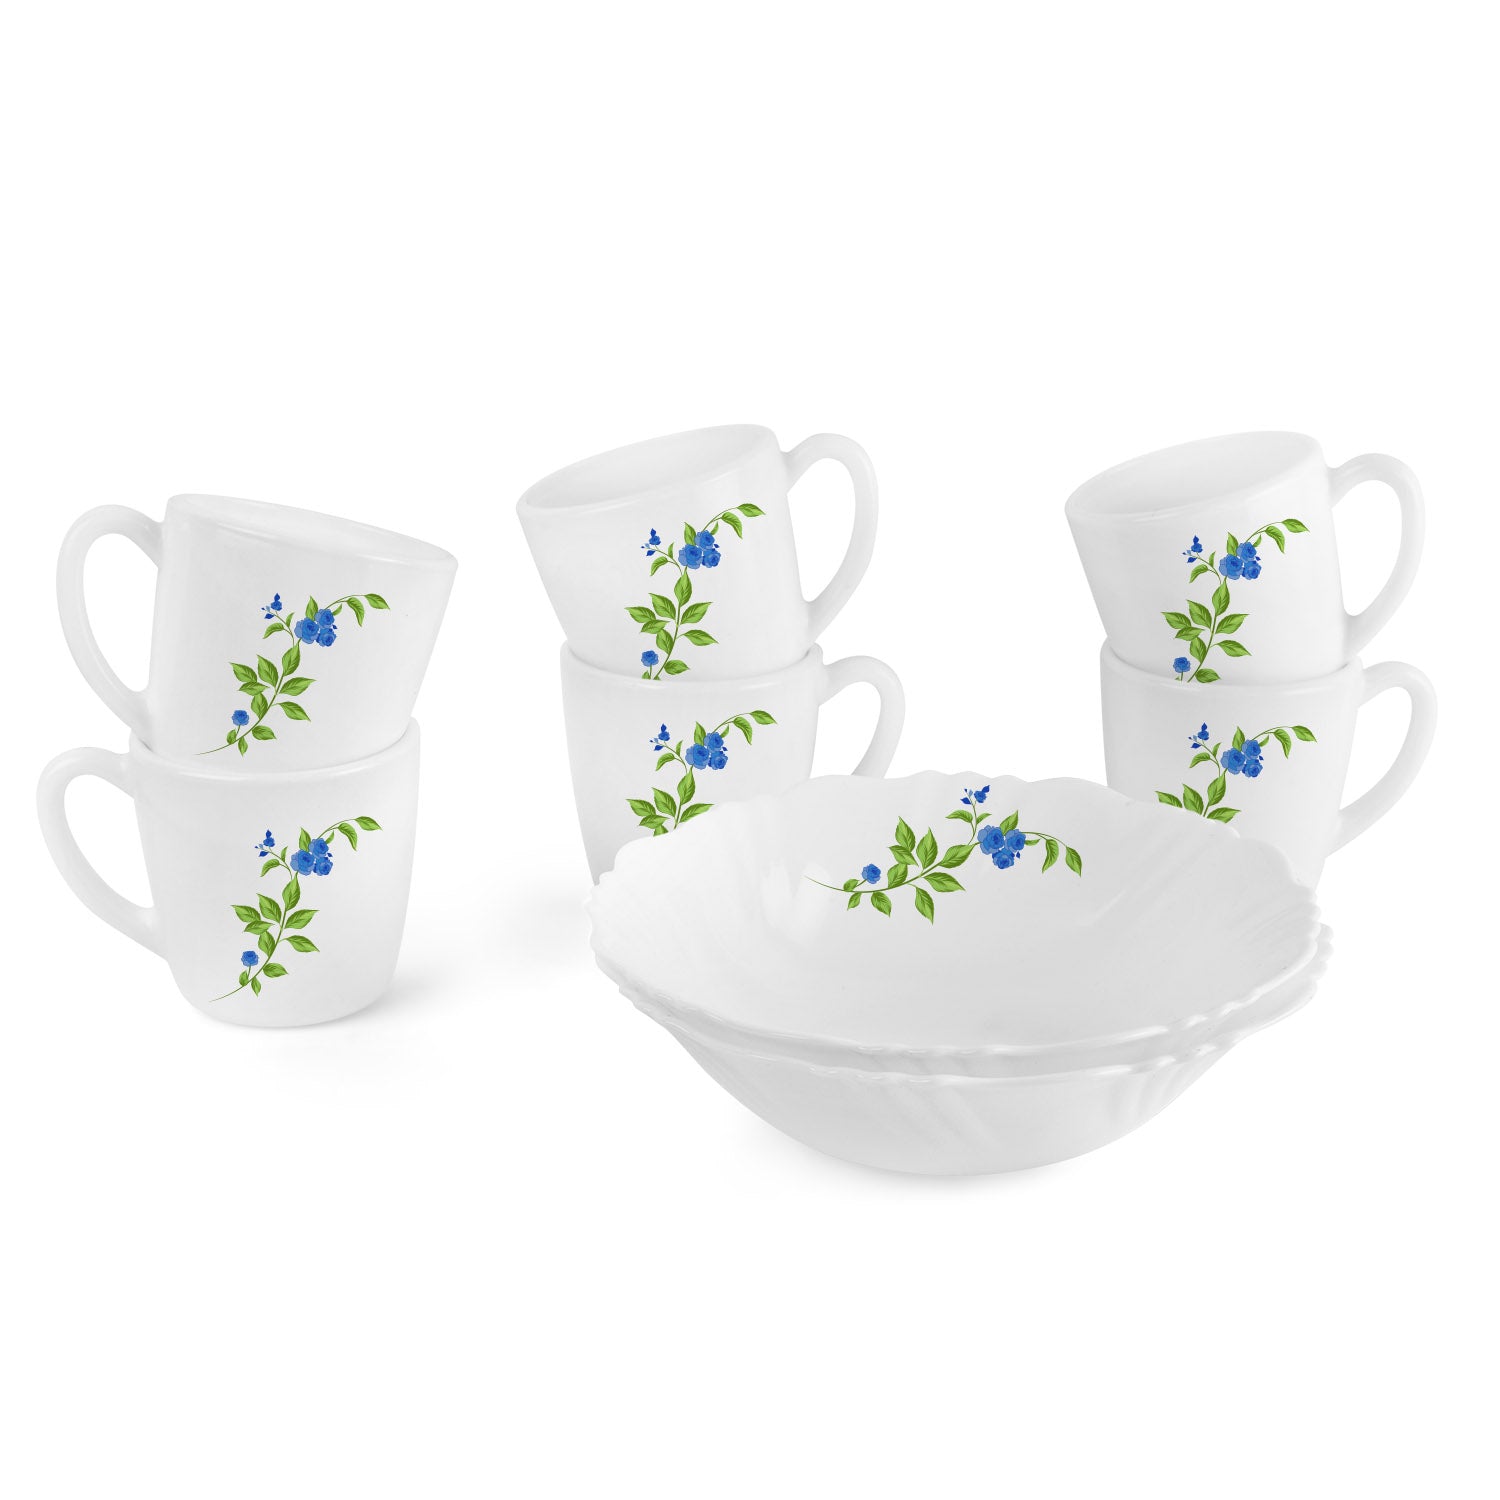 Imperial Series Quick Bite Bowl & Mug Gift set, 8 Pieces Moon Rose / 8 Pieces